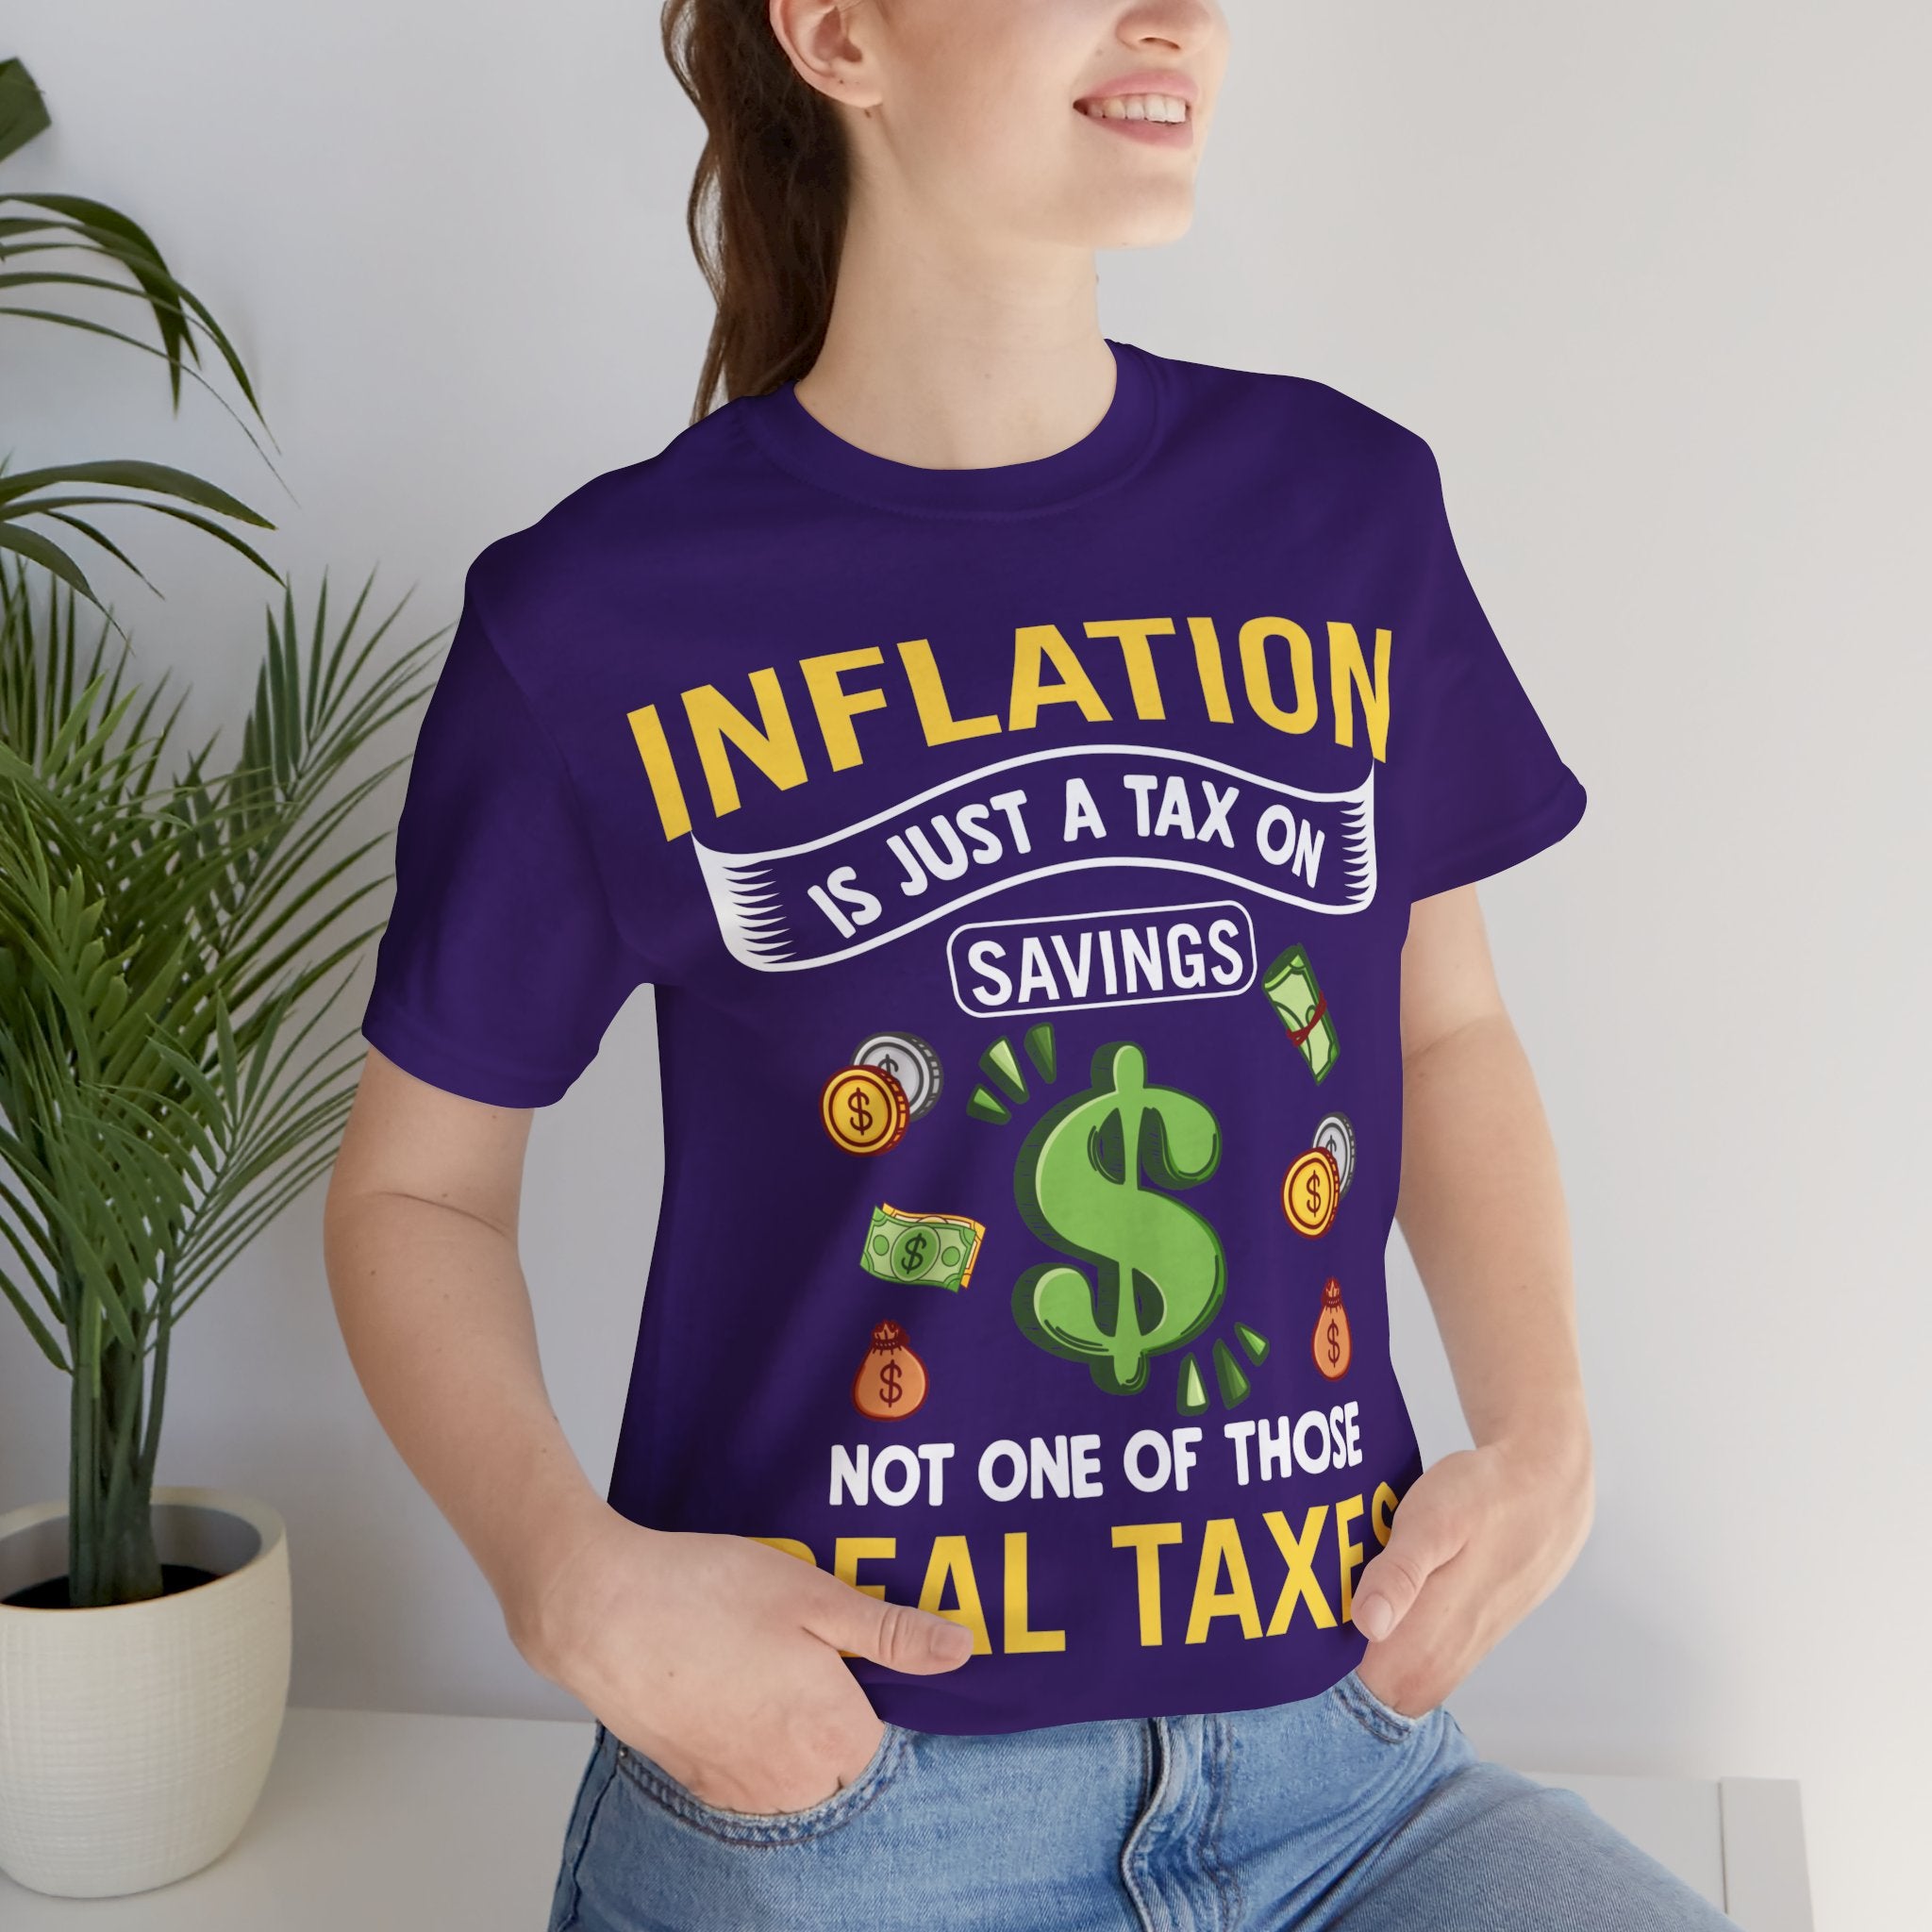 Inflation: Not a Real Tax - Dollar Sign